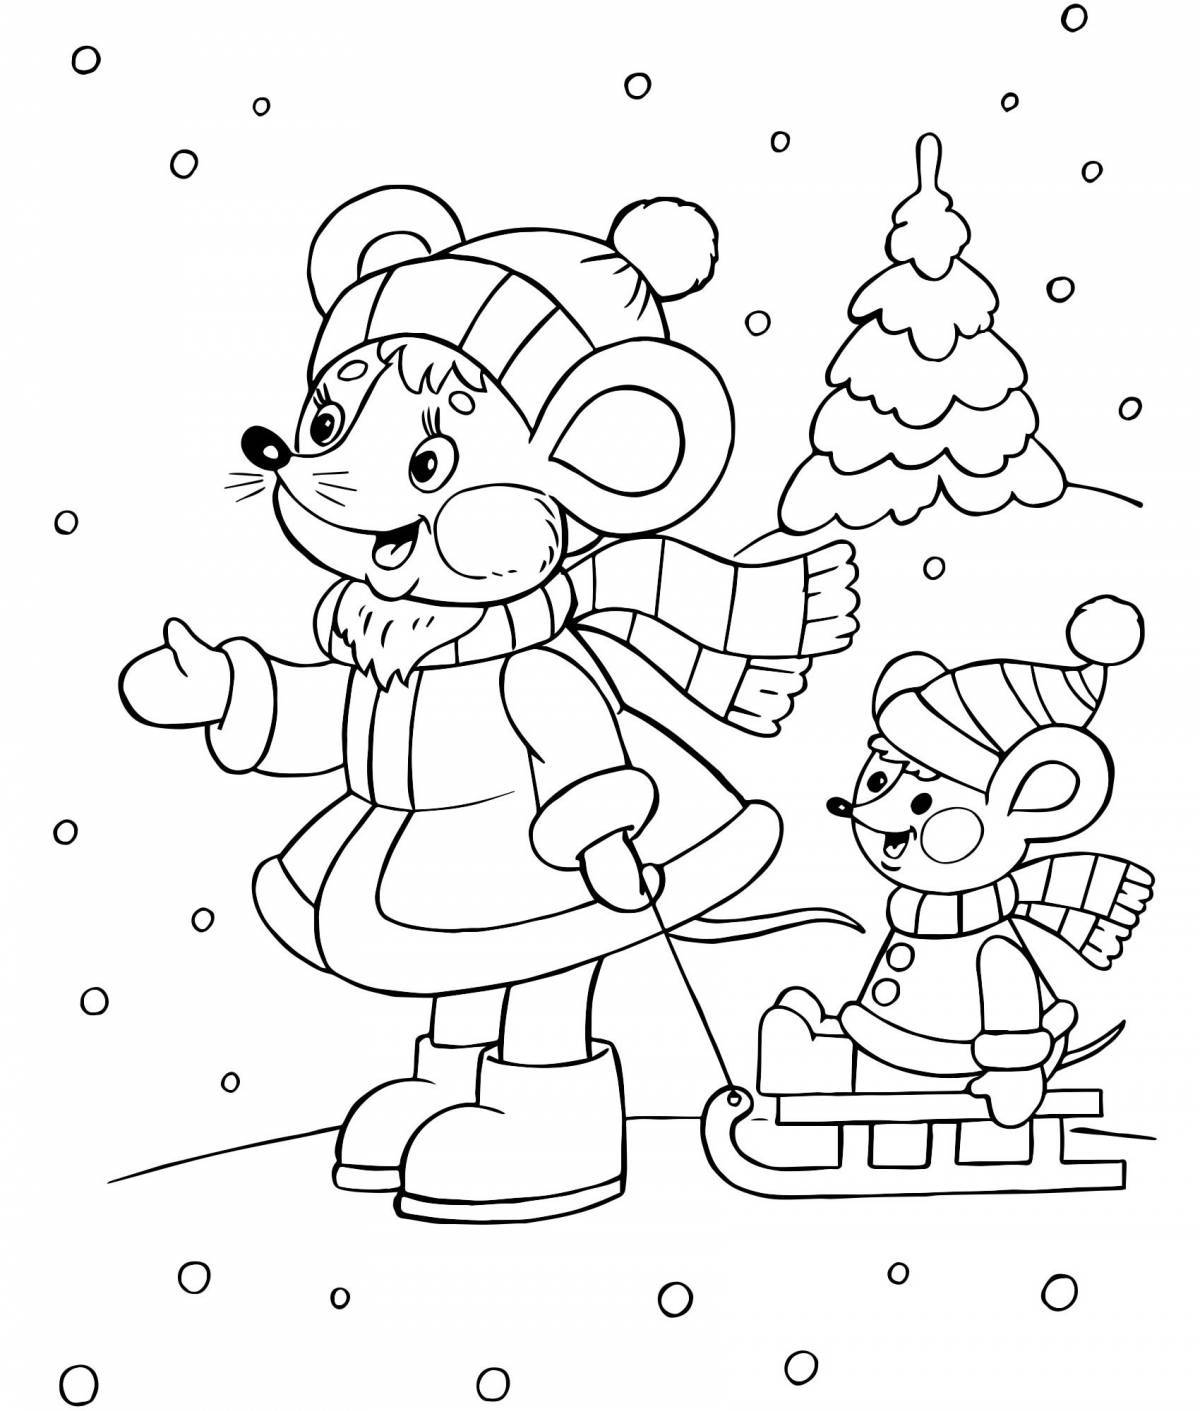 Joyful coloring winter for children 5-6 years old